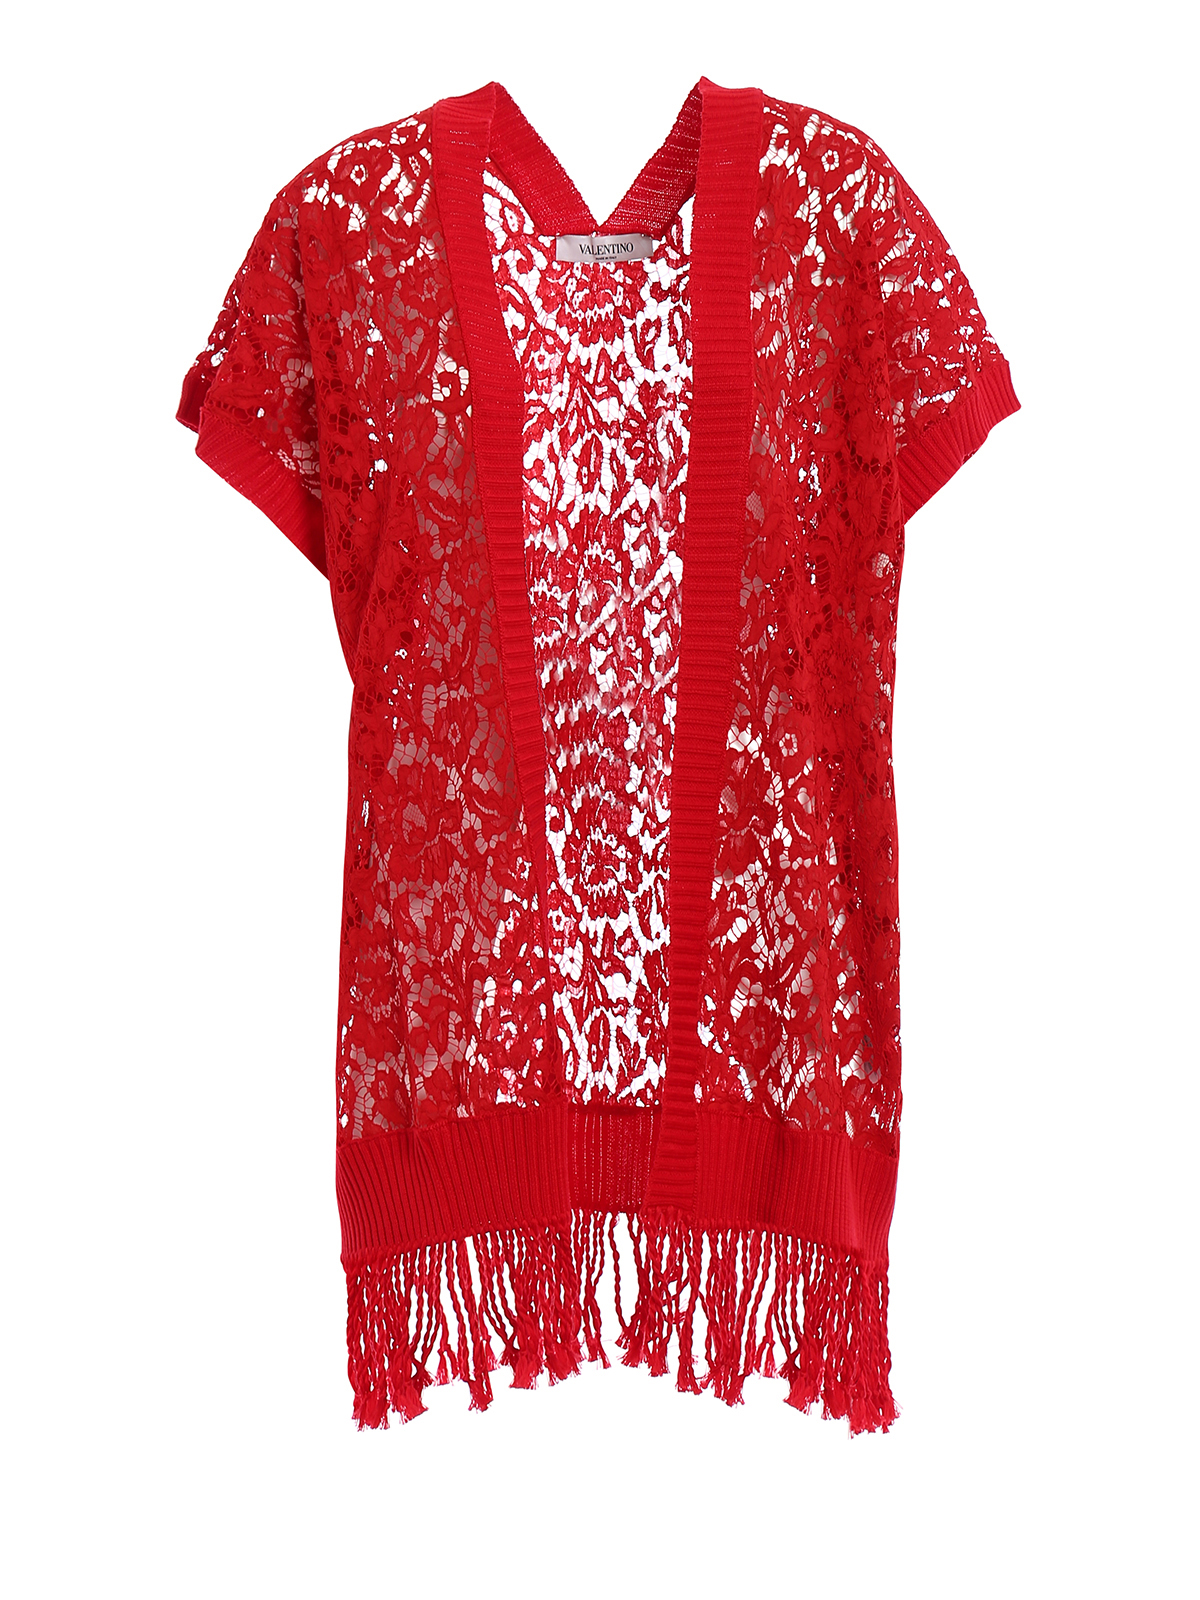 Arbeid Arabisch Plons Cardigans Valentino - Heavy Lace open front red poncho - PB3KS01A3QM157